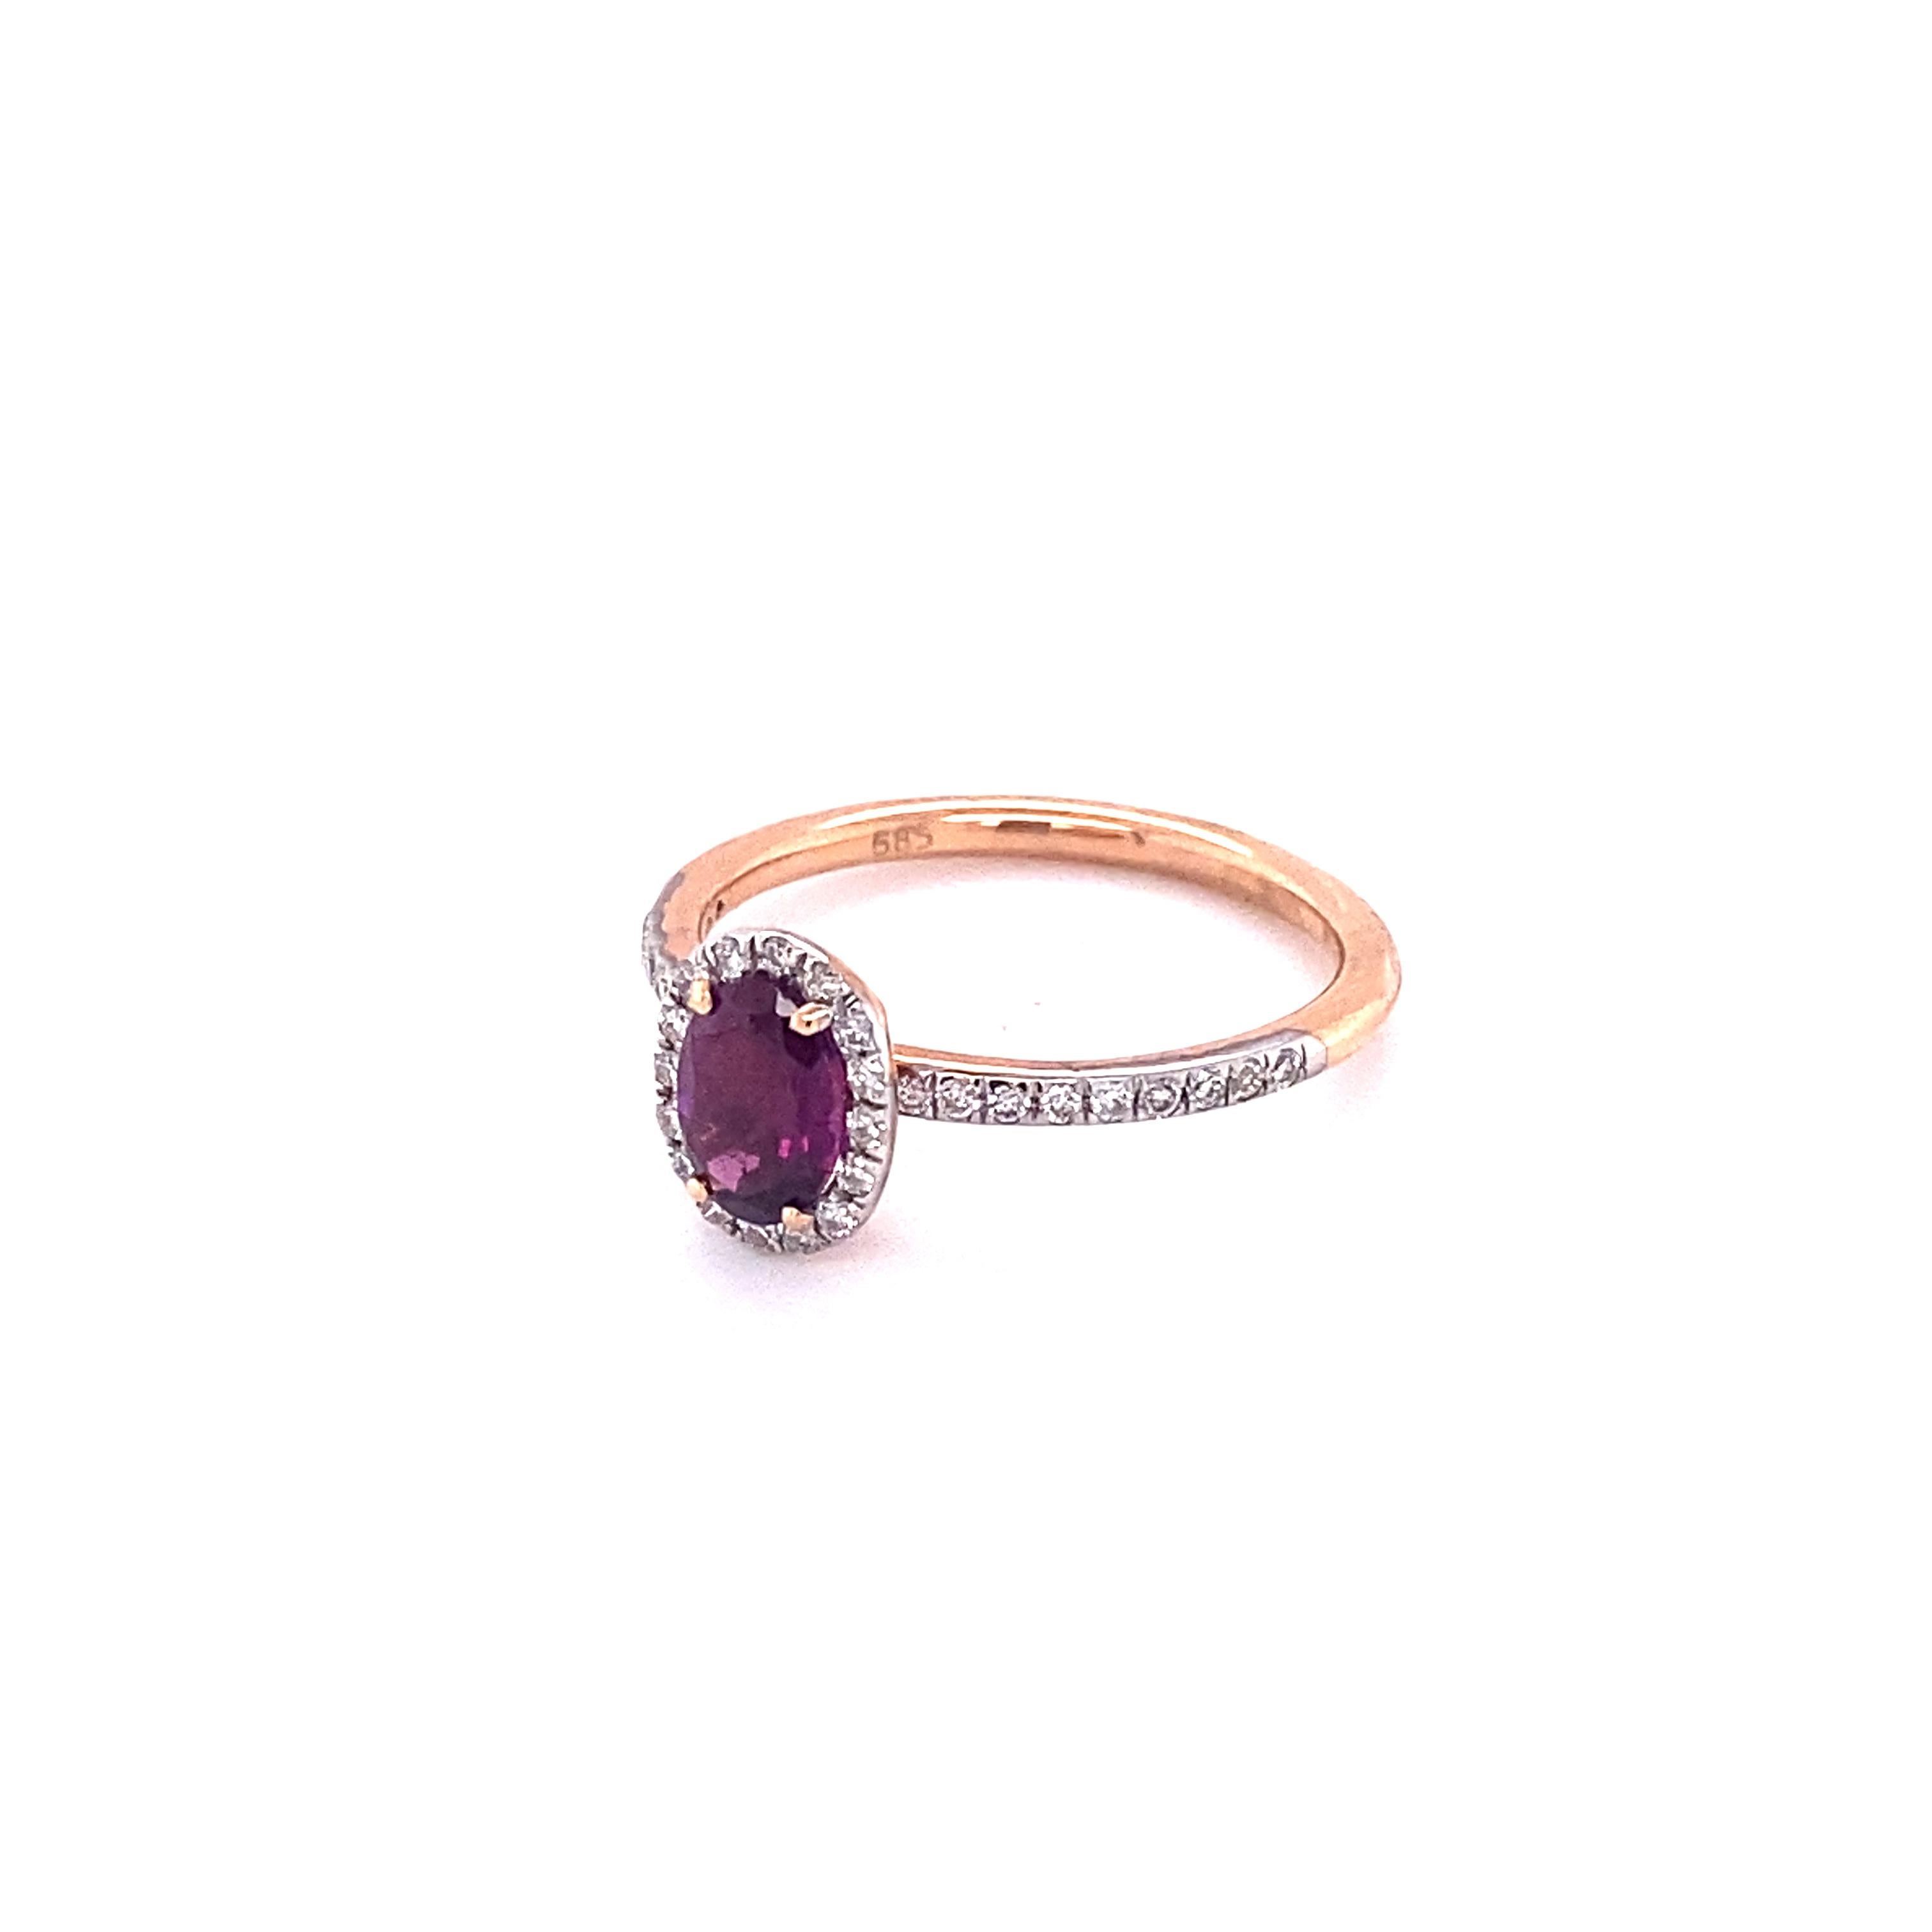 For Sale:  Gemstone Solitaire Ring Stack, 14k Solid Gold Rings with Natural Round Diamonds 11